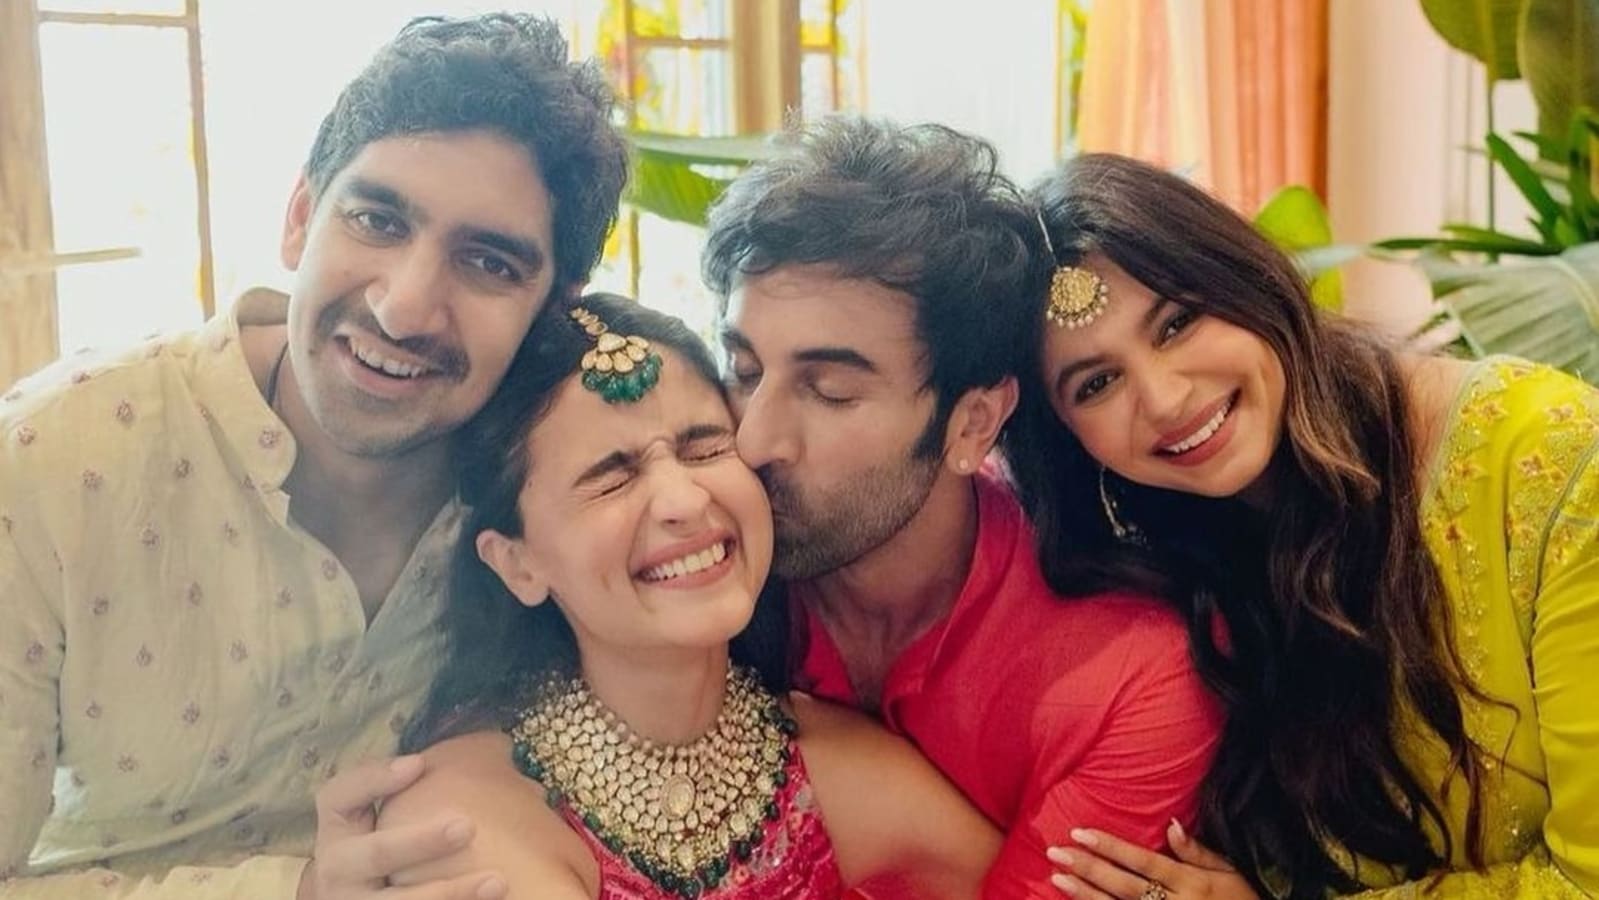 Alia Bhatt can’t stop smiling as Ranbir Kapoor kisses her in unseen pic